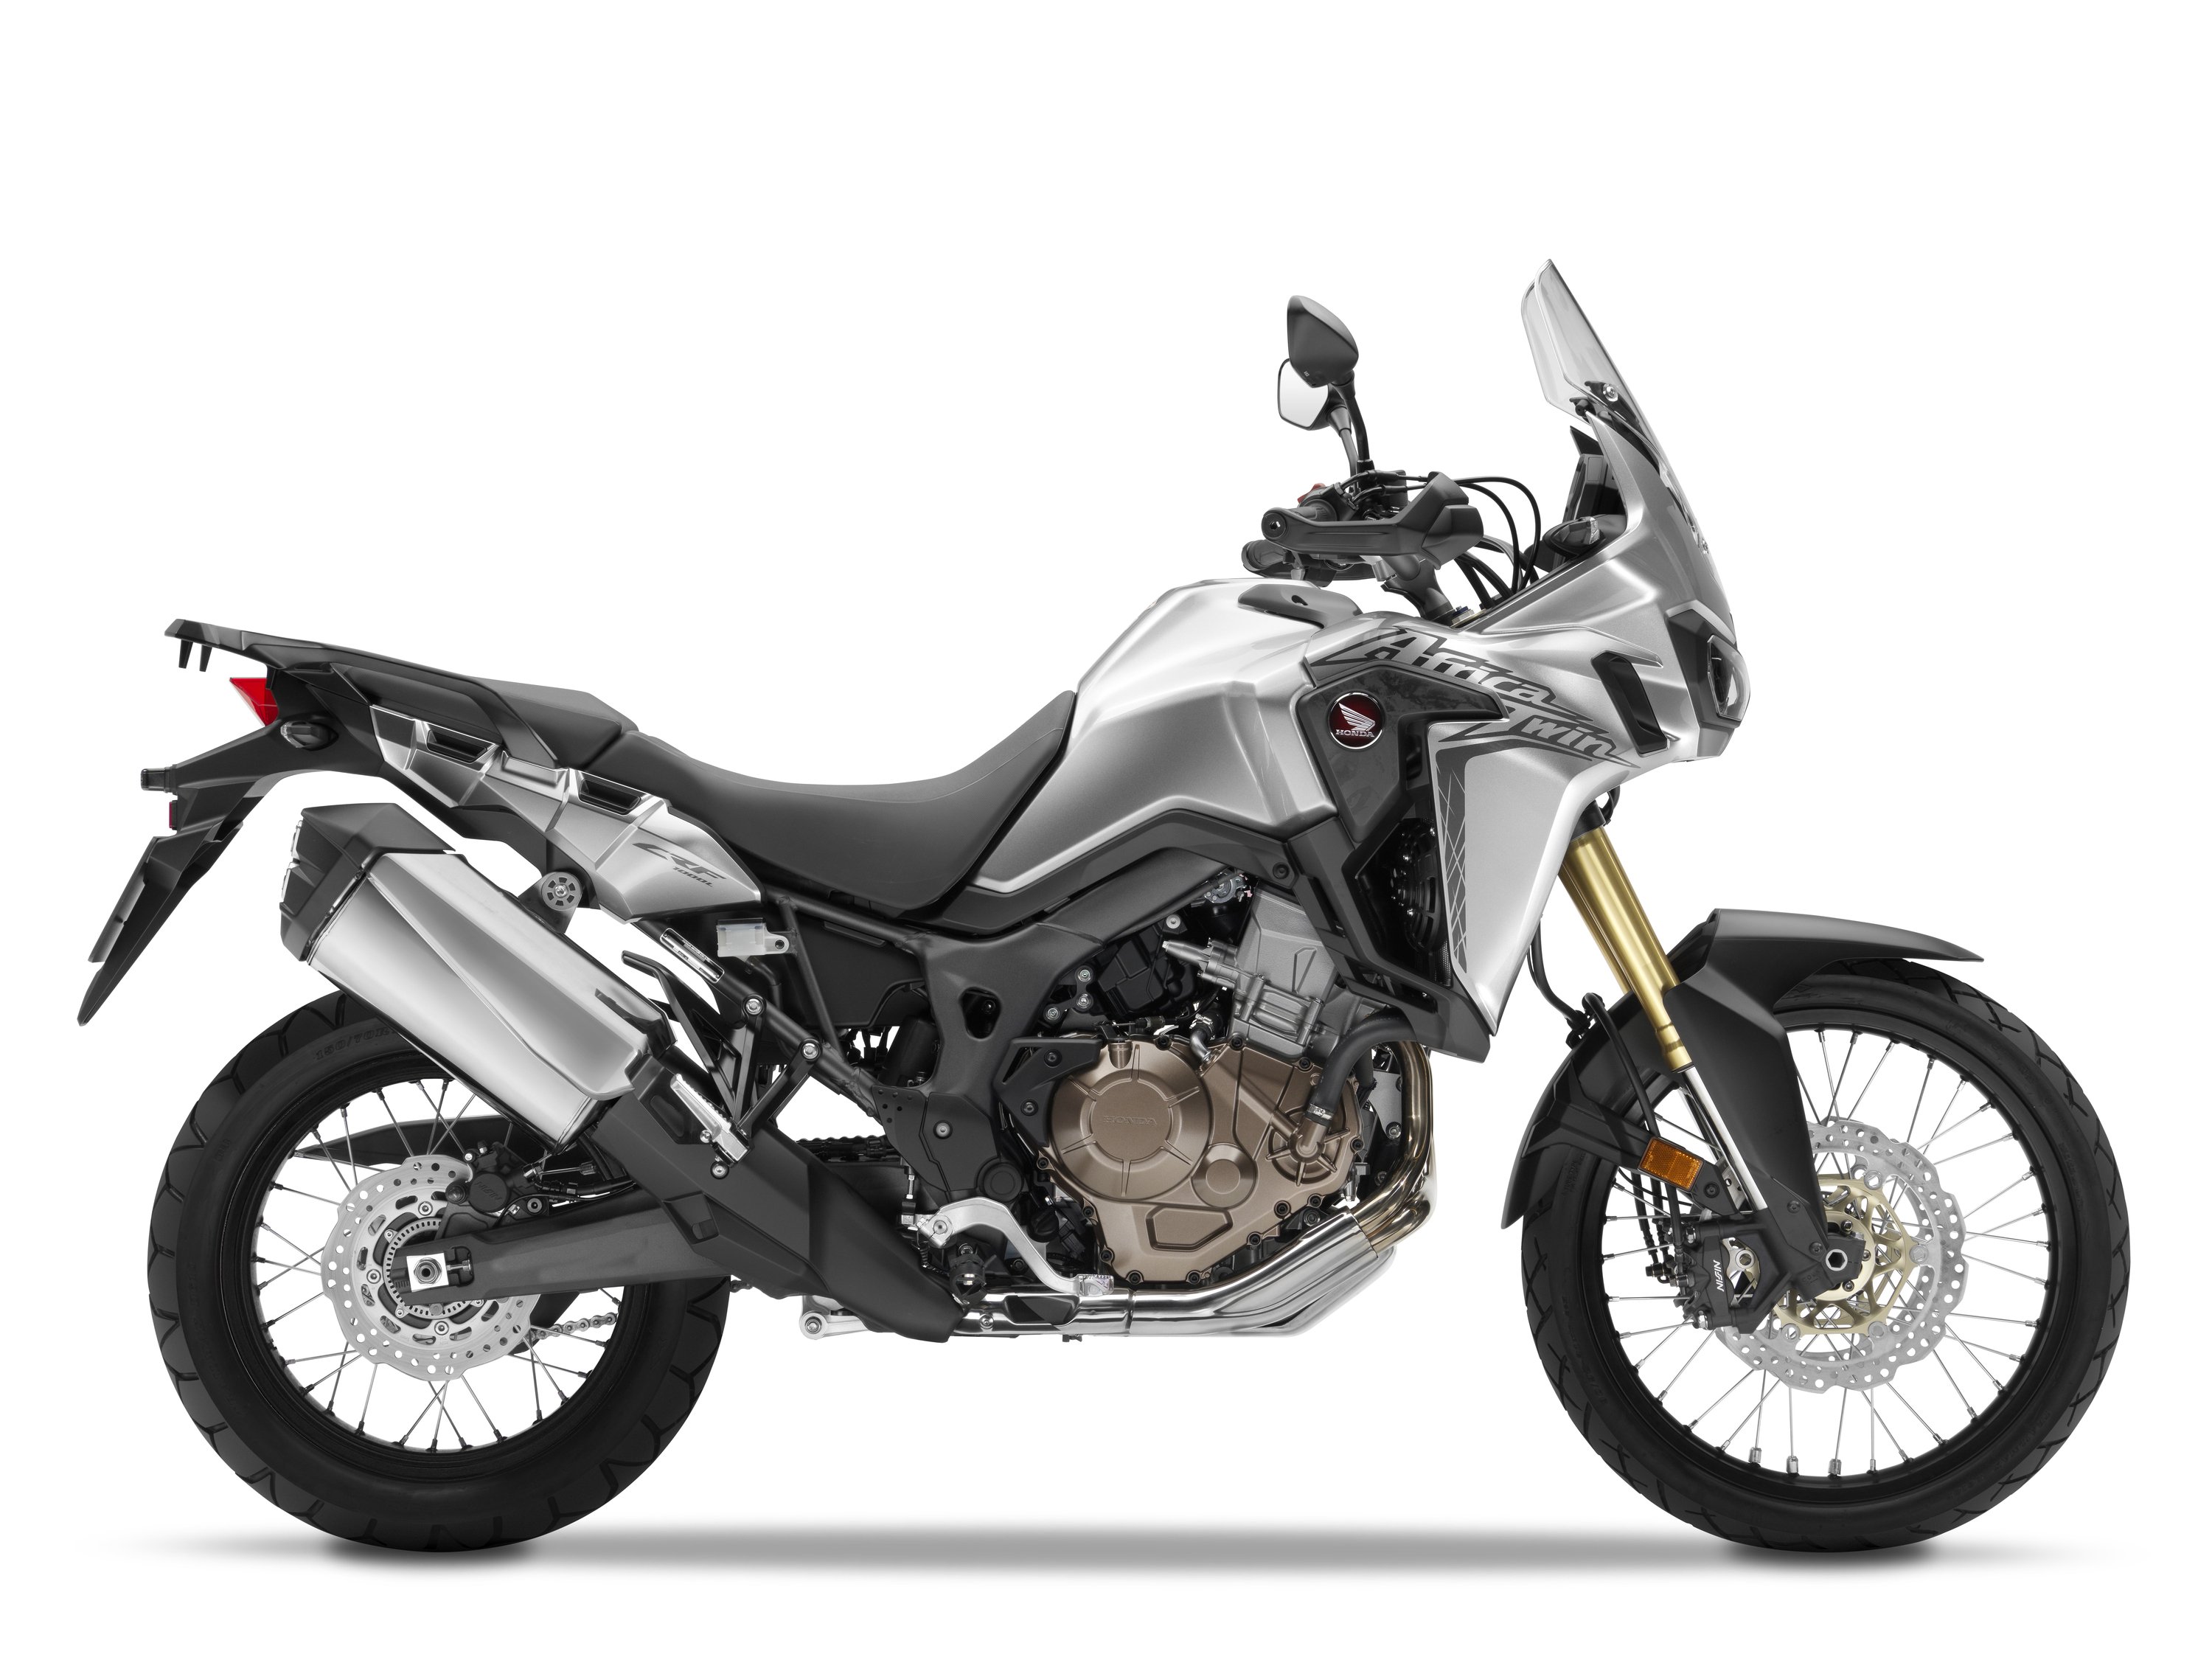 Honda Africa Twin CRF 1000L Africa Twin CRF 1000L ABS (2016 - 17)